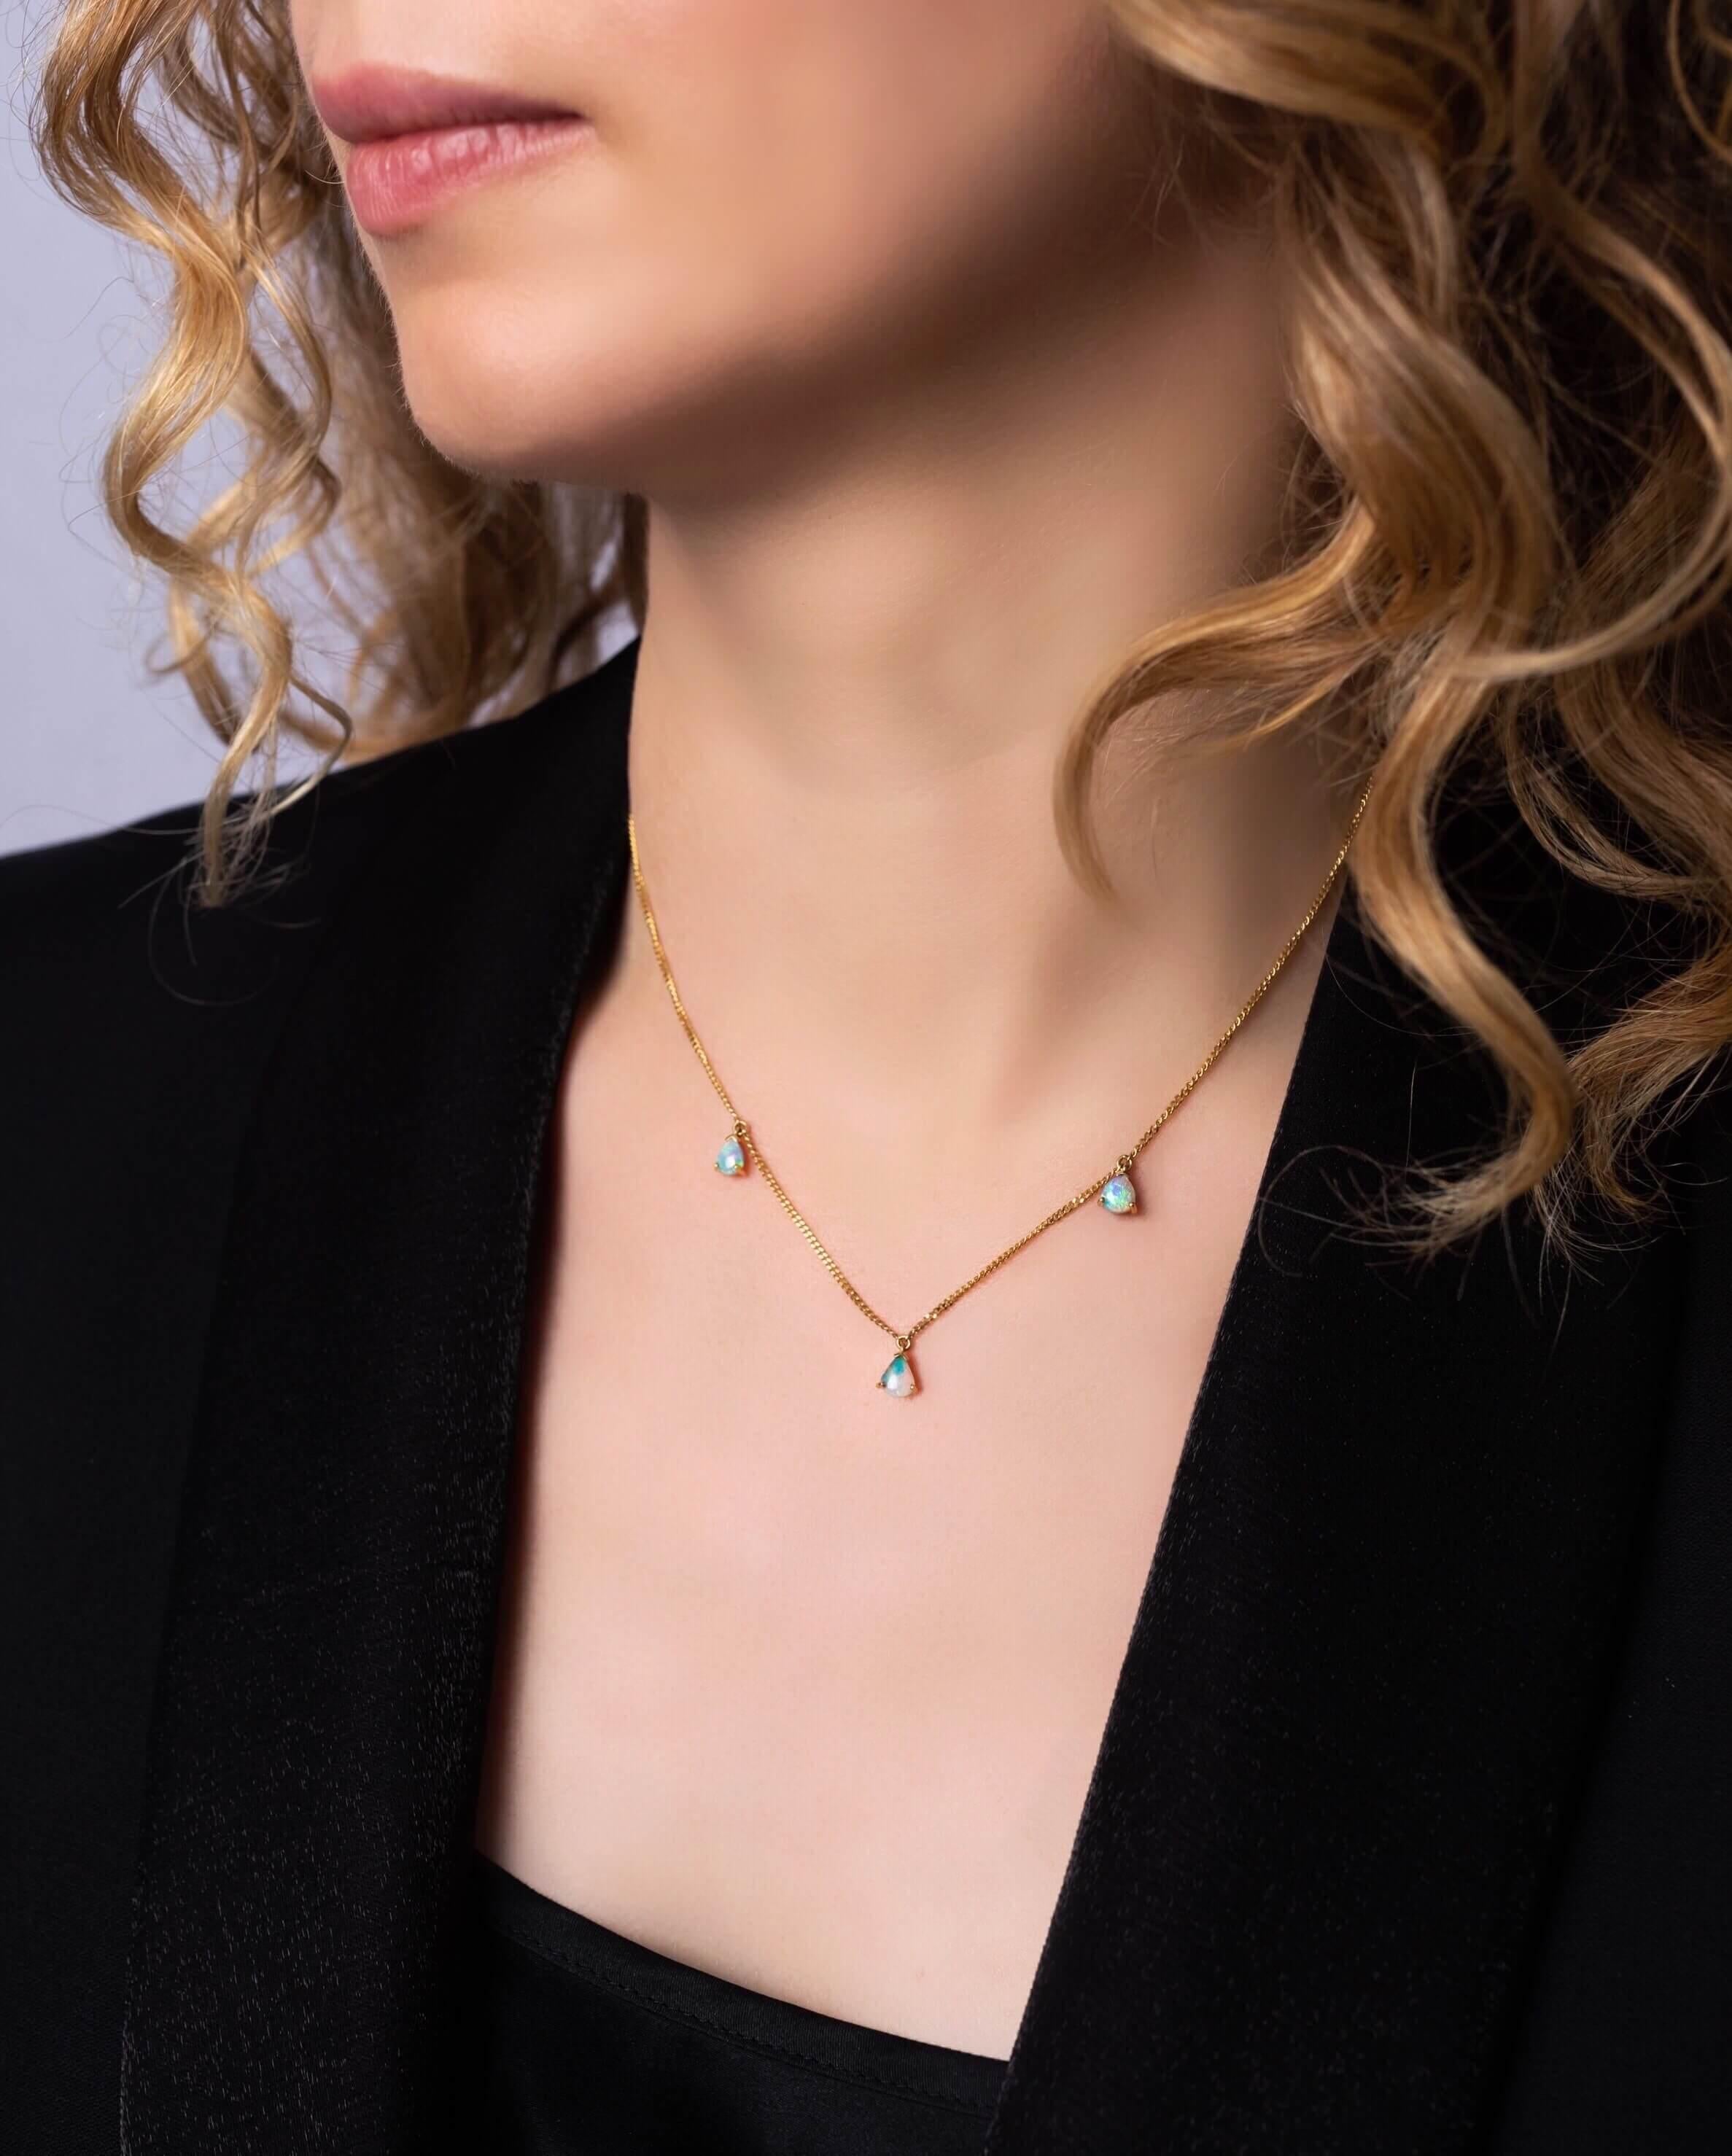 The dainty and becoming ‘Dewdrops’ necklace is for the stylish and classic woman featuring a trio of stunning boulder opals (0.77ct) ethically sourced from our Jundah-Opalville, Queensland mines. Set in a delicate 18K Yellow Gold chain to let the